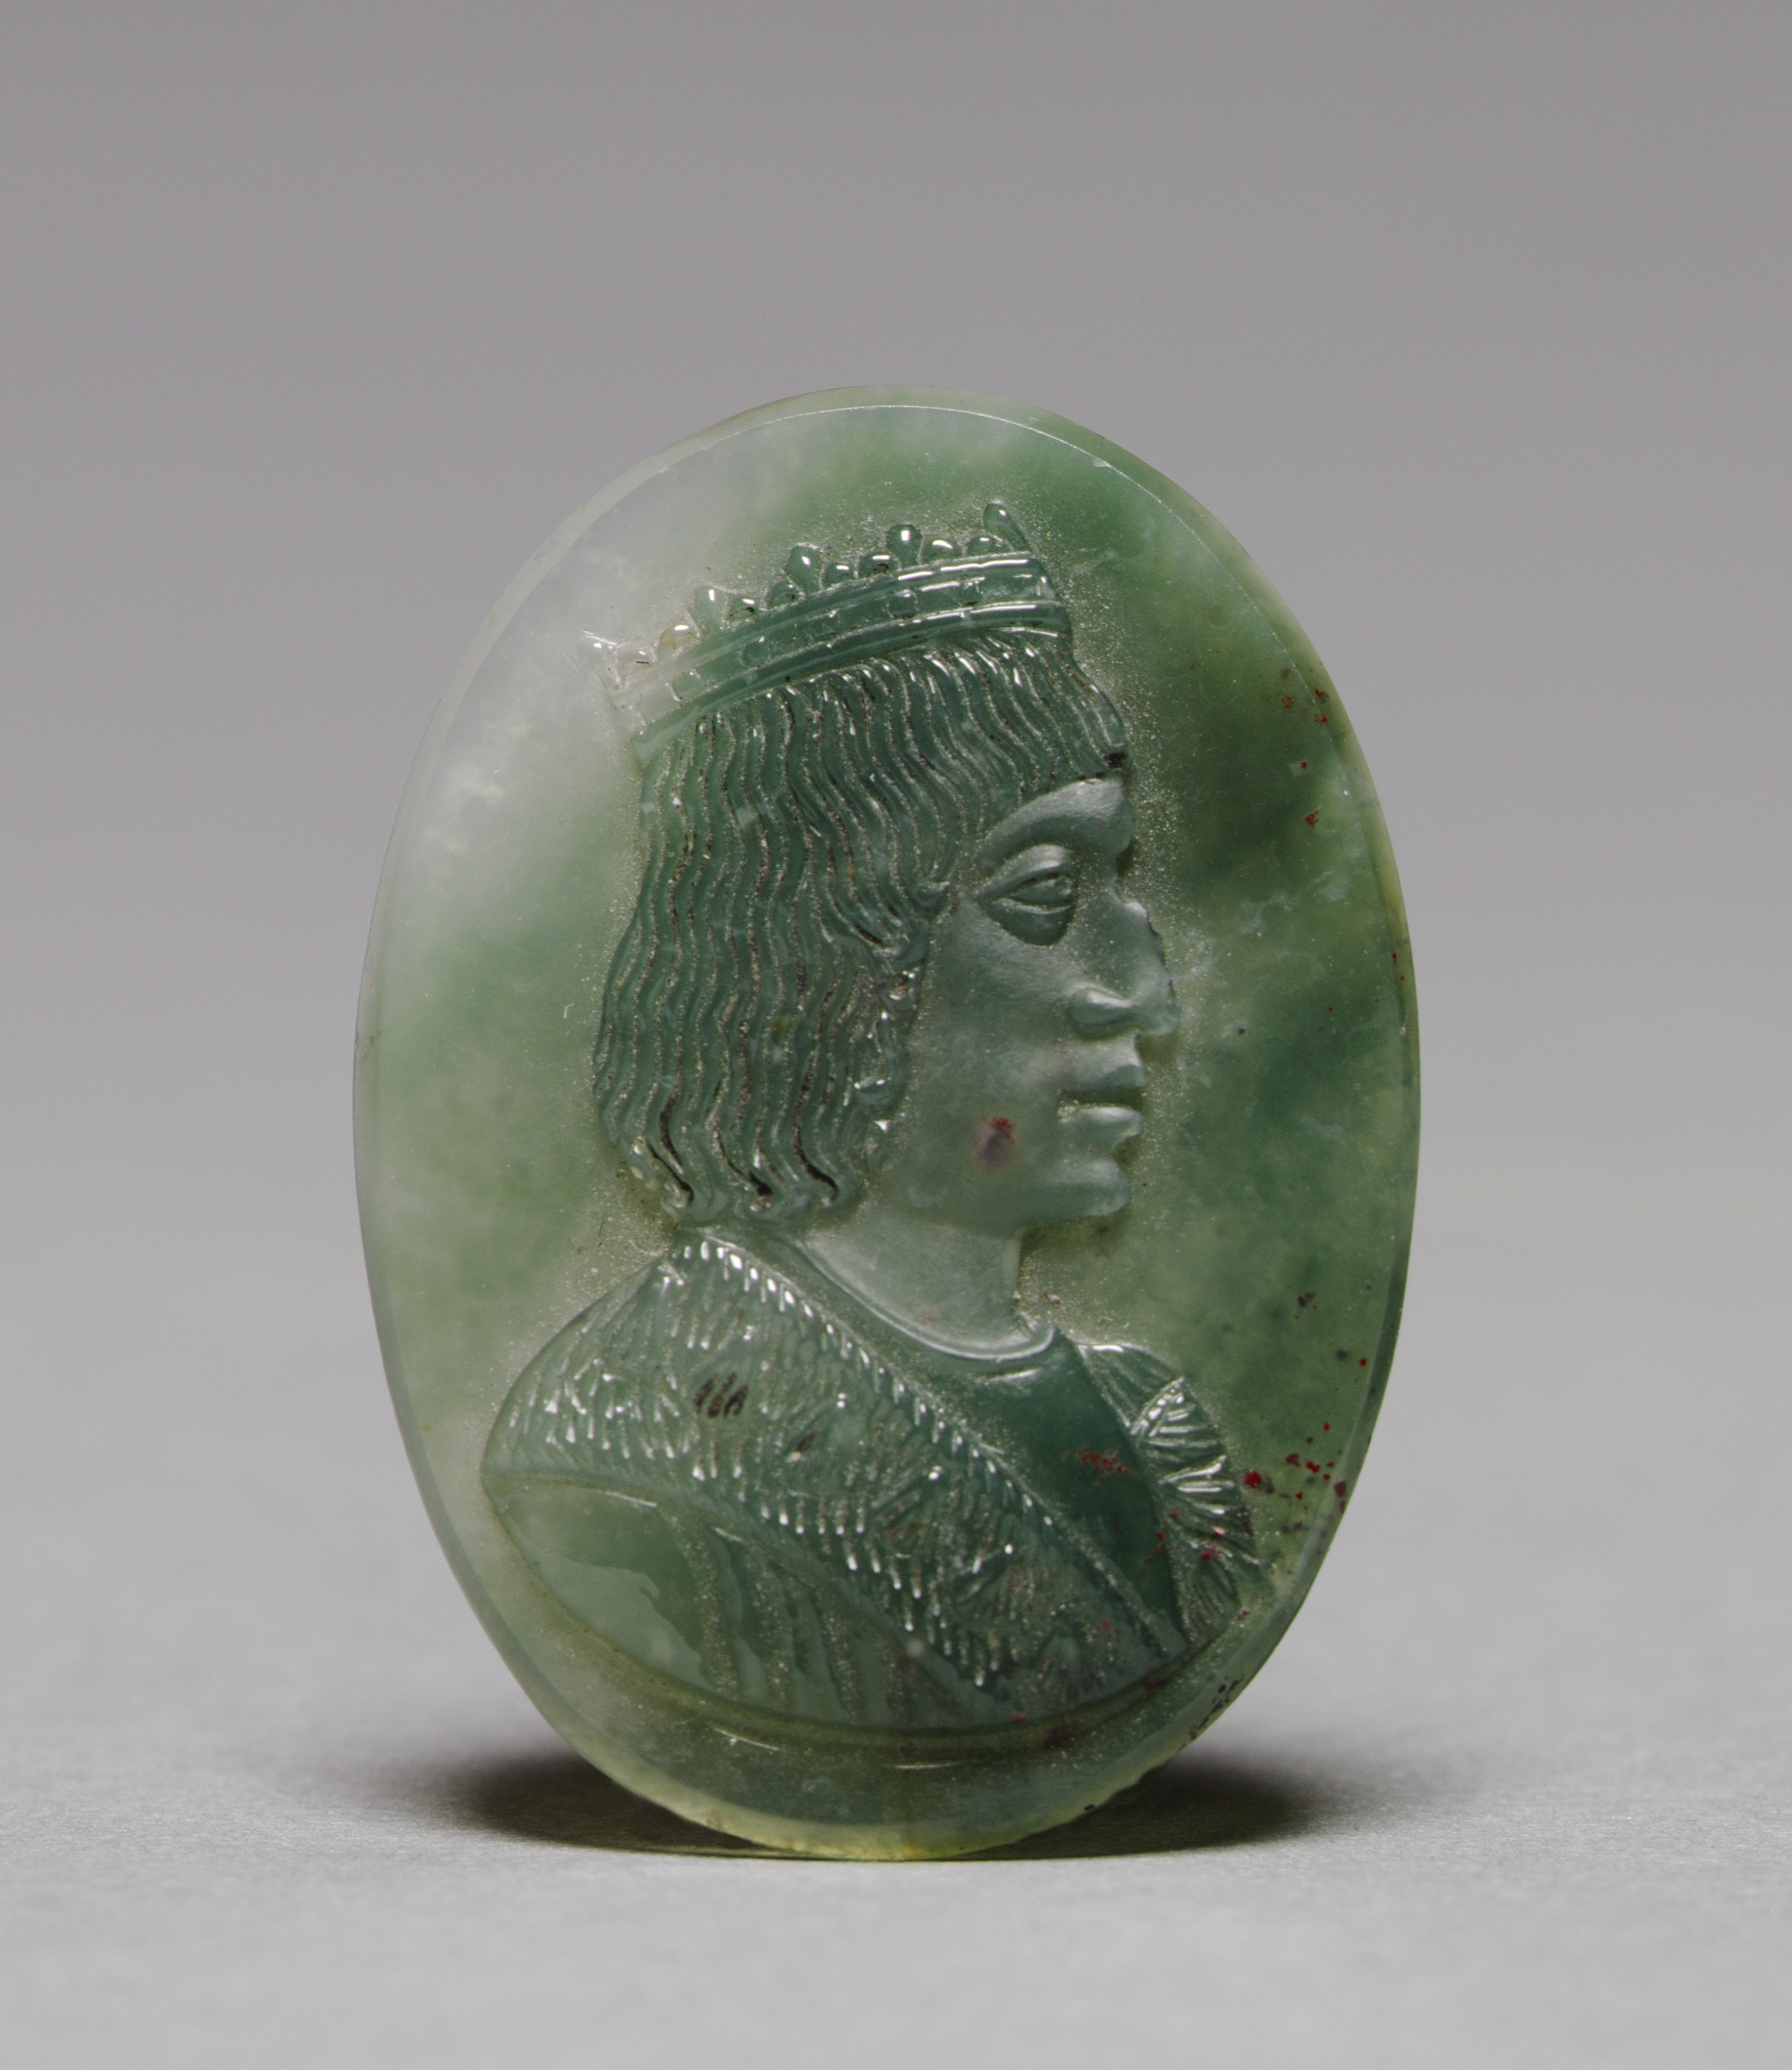 Cameo of King Charles VIII of France (1470-1498)